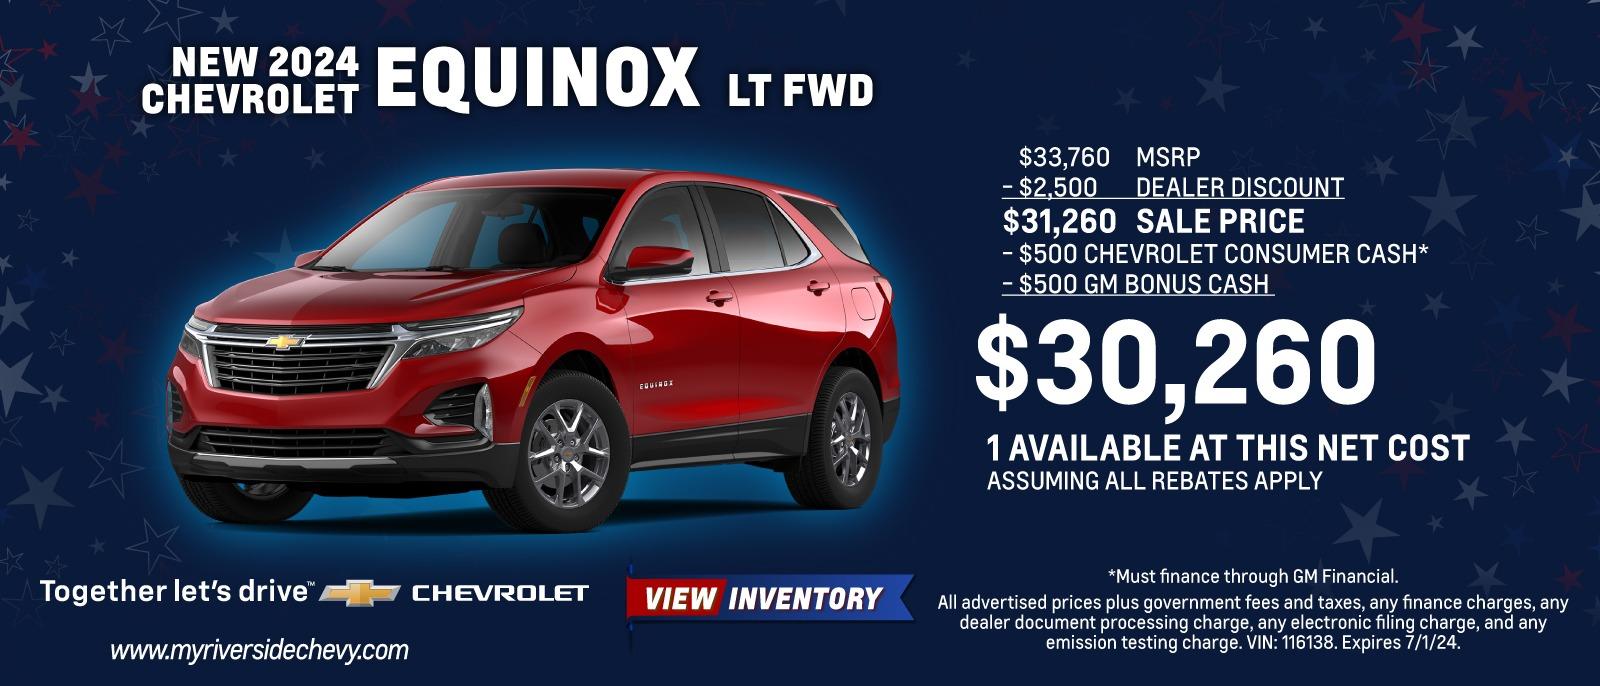 New 2024 Chevy  Equinox LT FWD - $33,760 MSRP -$2,500 Riverside Chevrolet DEALER DISCOUNT $31,260 SALE PRICE - $500 CHEVROLET CONSUMER CASH* -$500 GM BONUS CASH $30,260 1 AVAILABLE AT THIS NET COST ASSUMING ALL REBATES APPLY